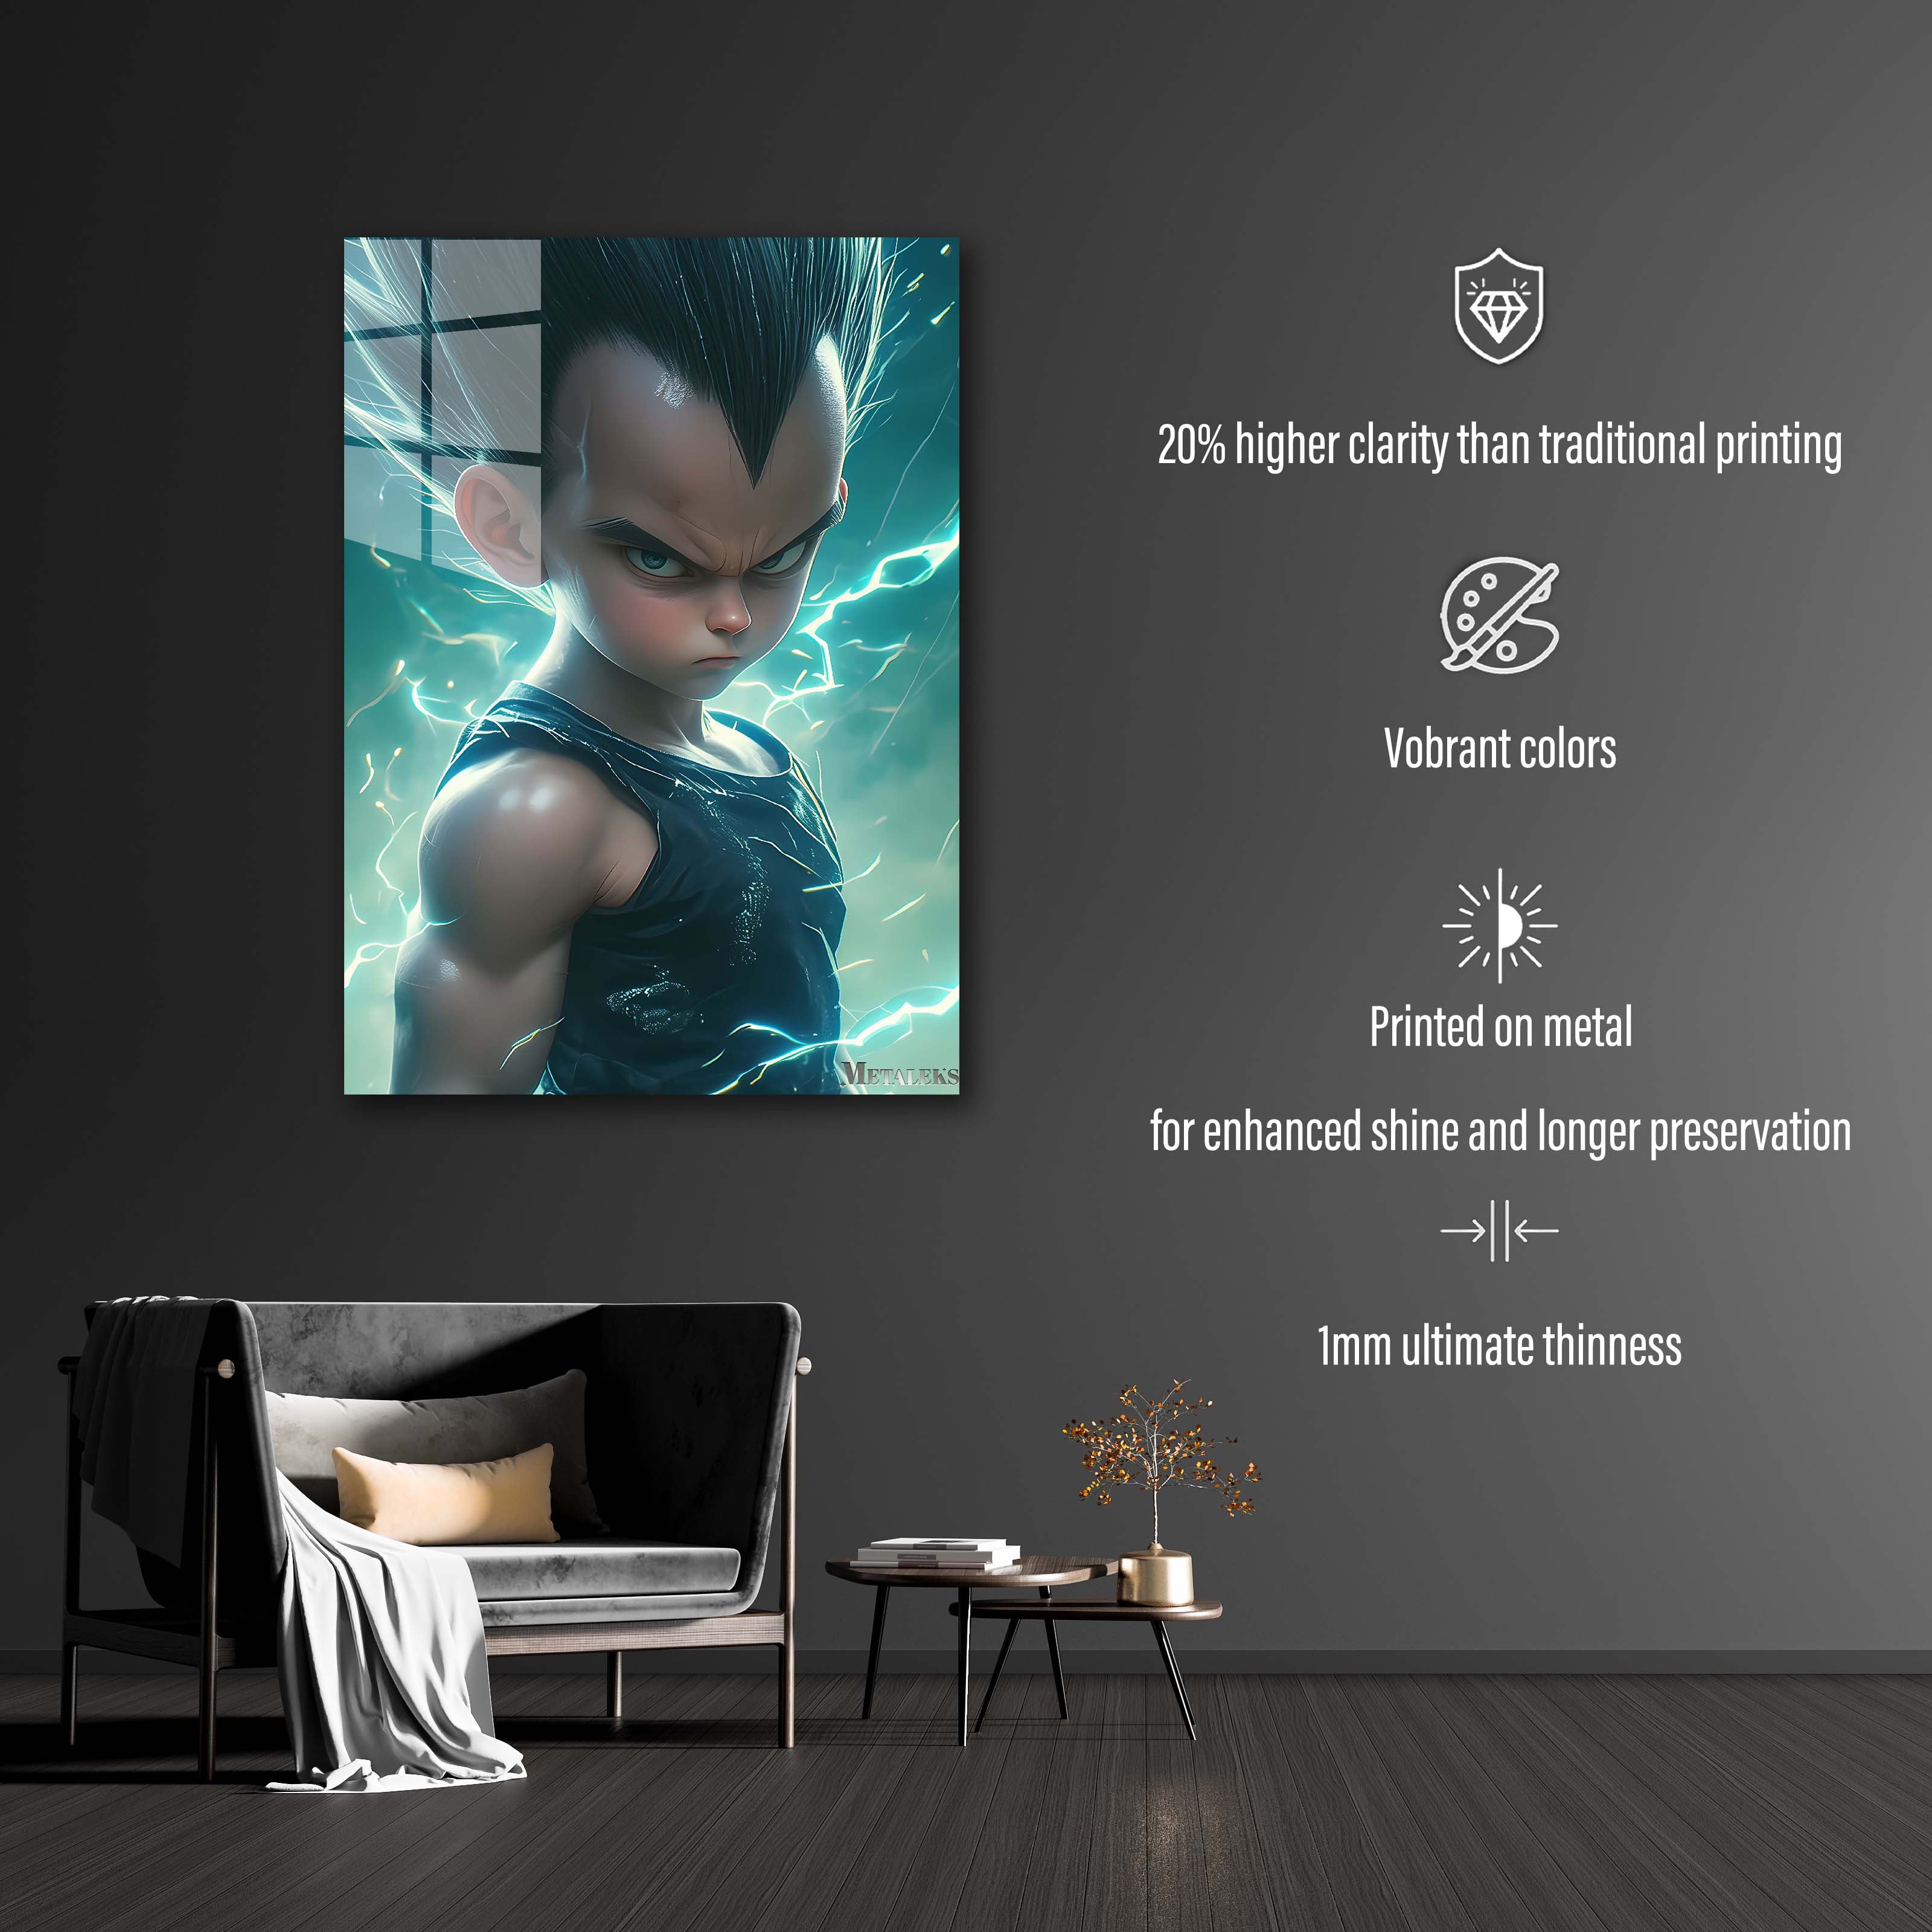 Baby Vegeta-designed by @ Universo mid